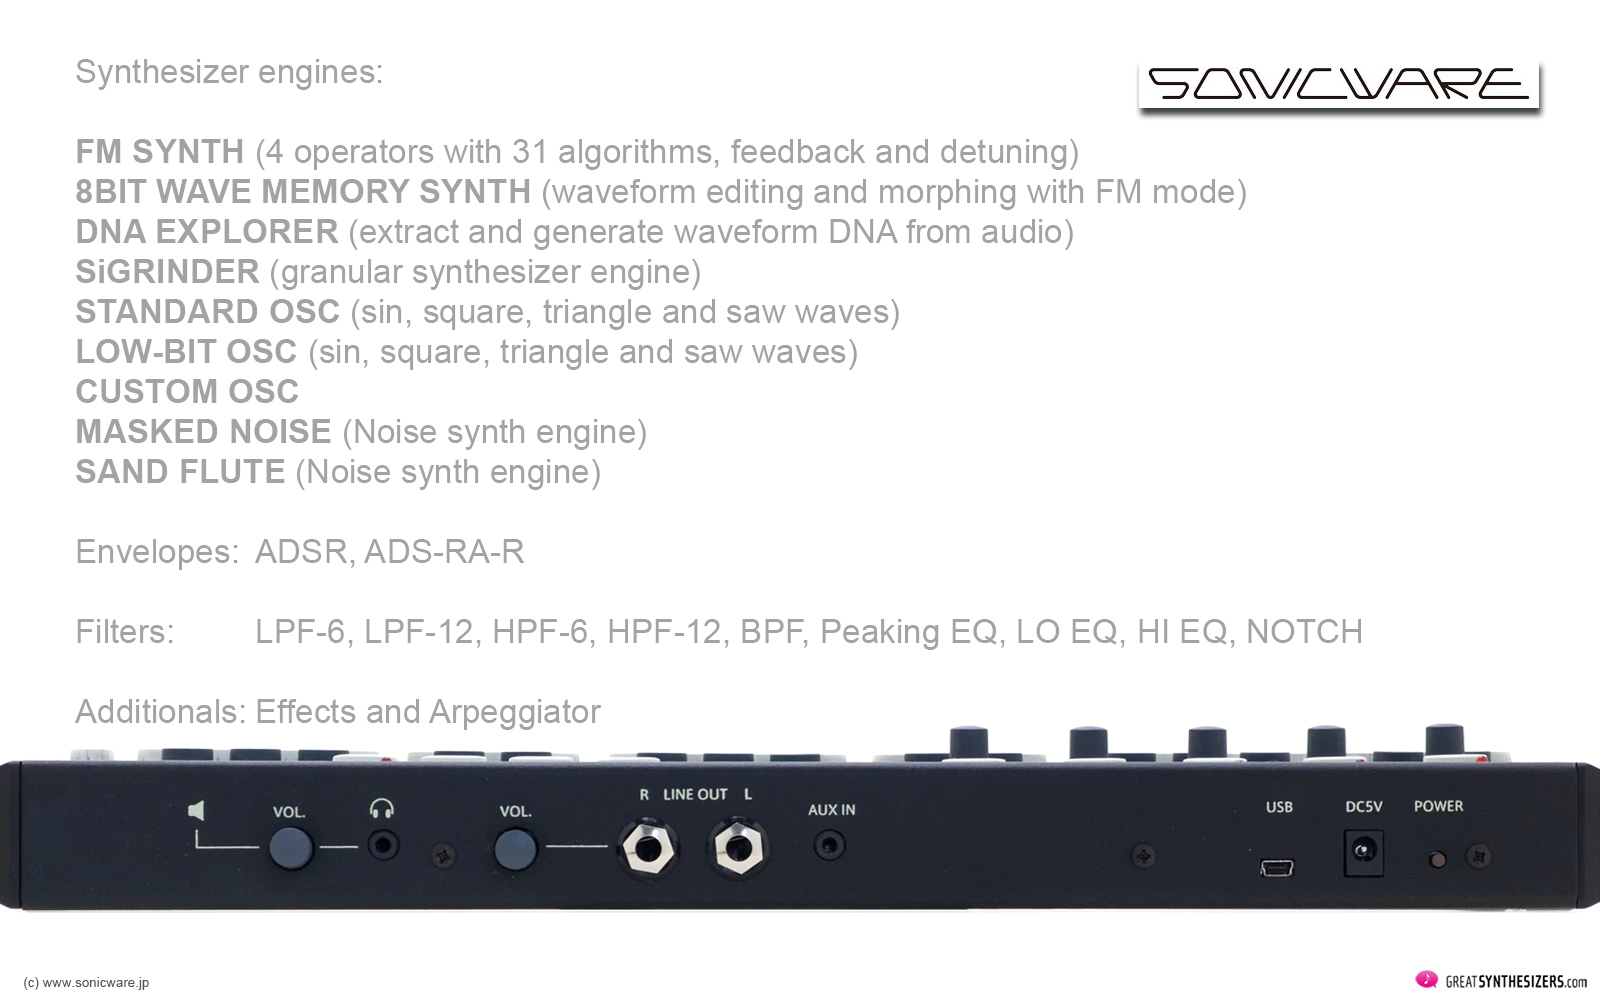 Sonicware ELZ_1: compact Synth with 1001 features - GreatSynthesizers